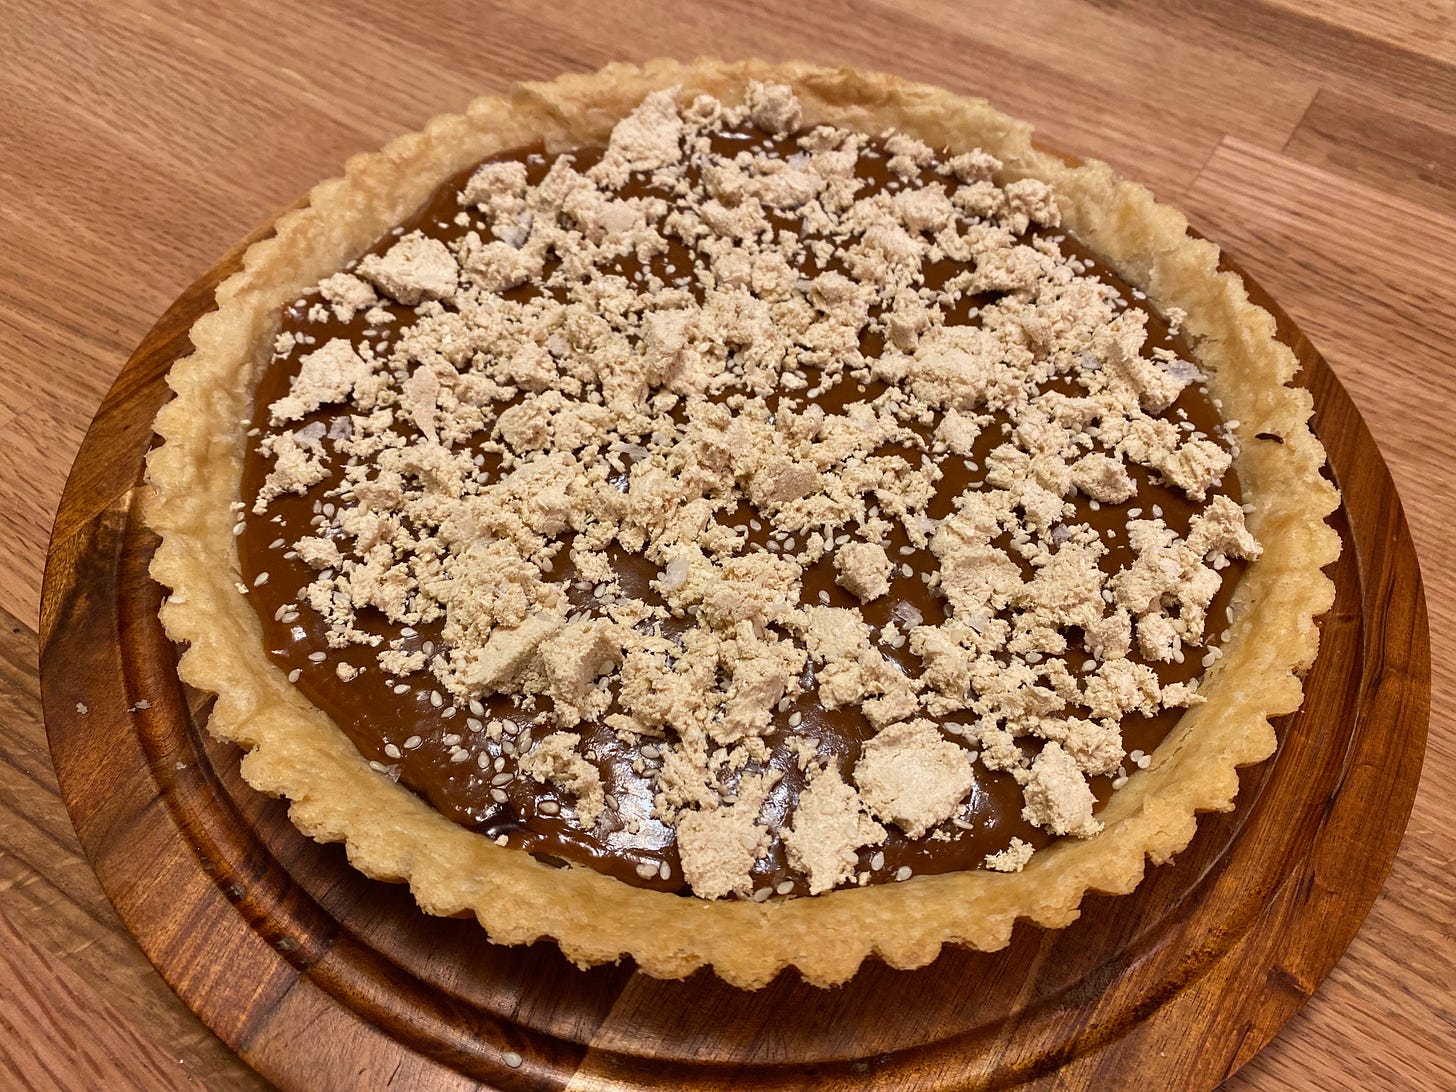 A round tart with fluted edges sits on a wooden platter. The chocolate filling is covered with crumbled pieces of halvah and sprinkled with sesame seeds.